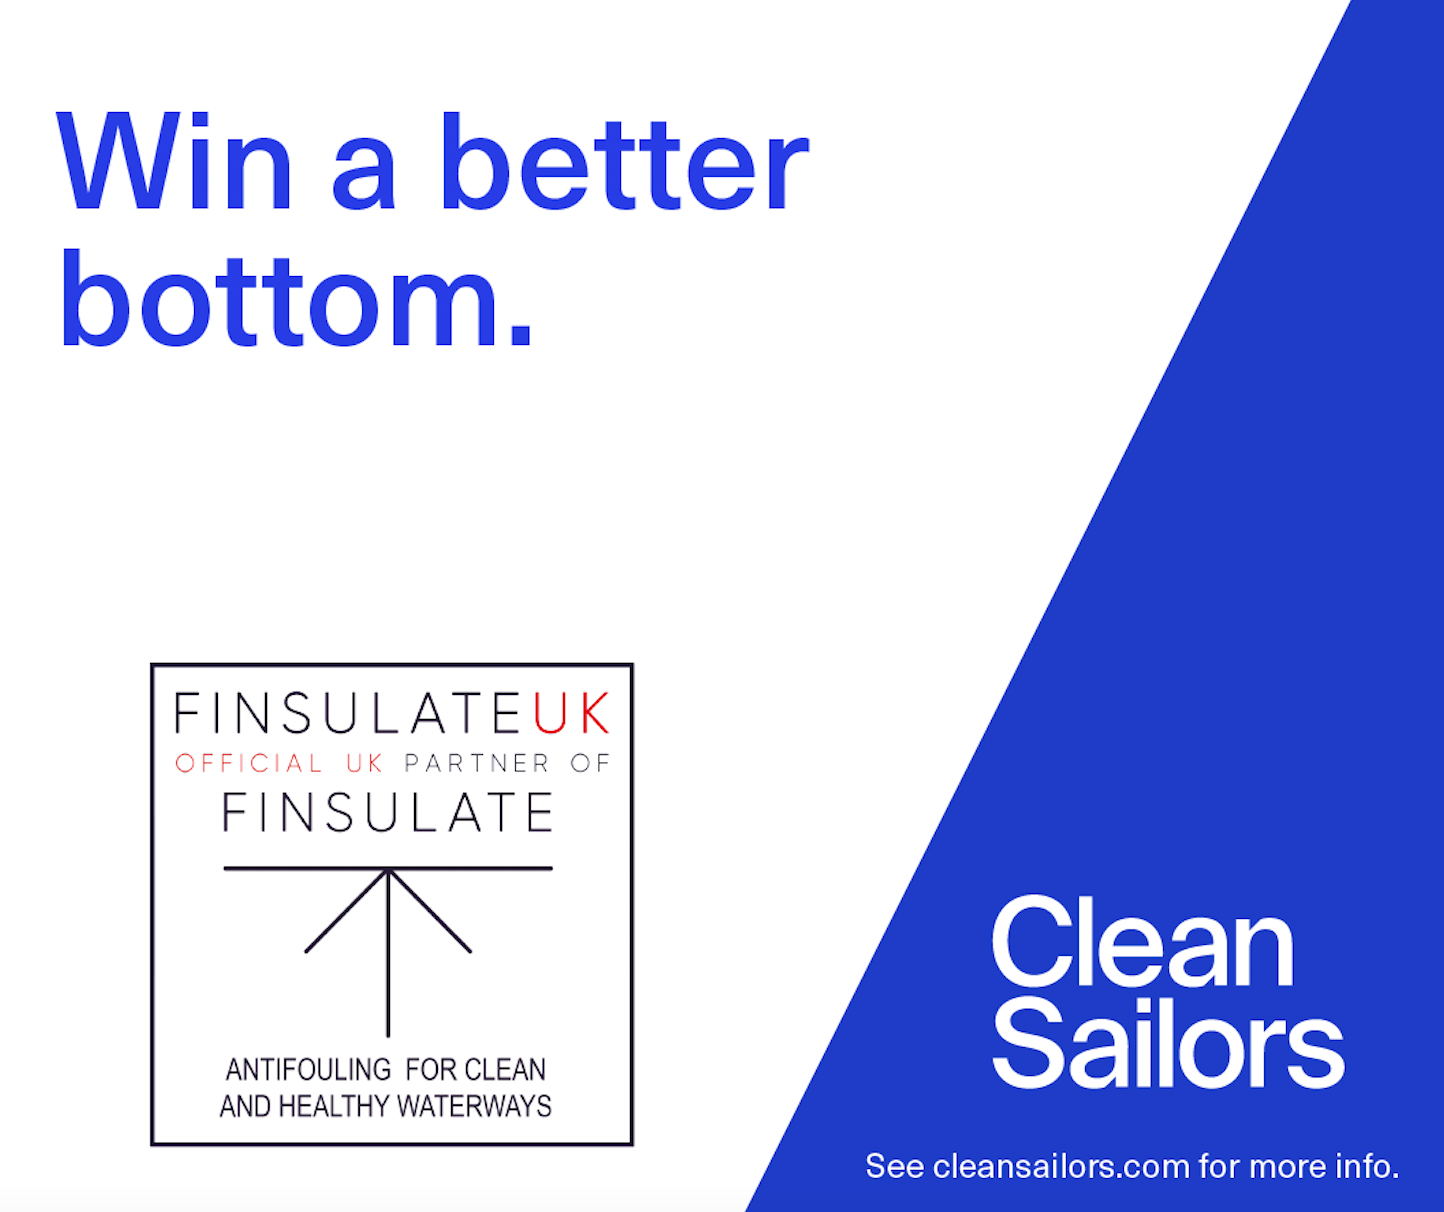 Competition for UK boatowners: Win a better bottom!